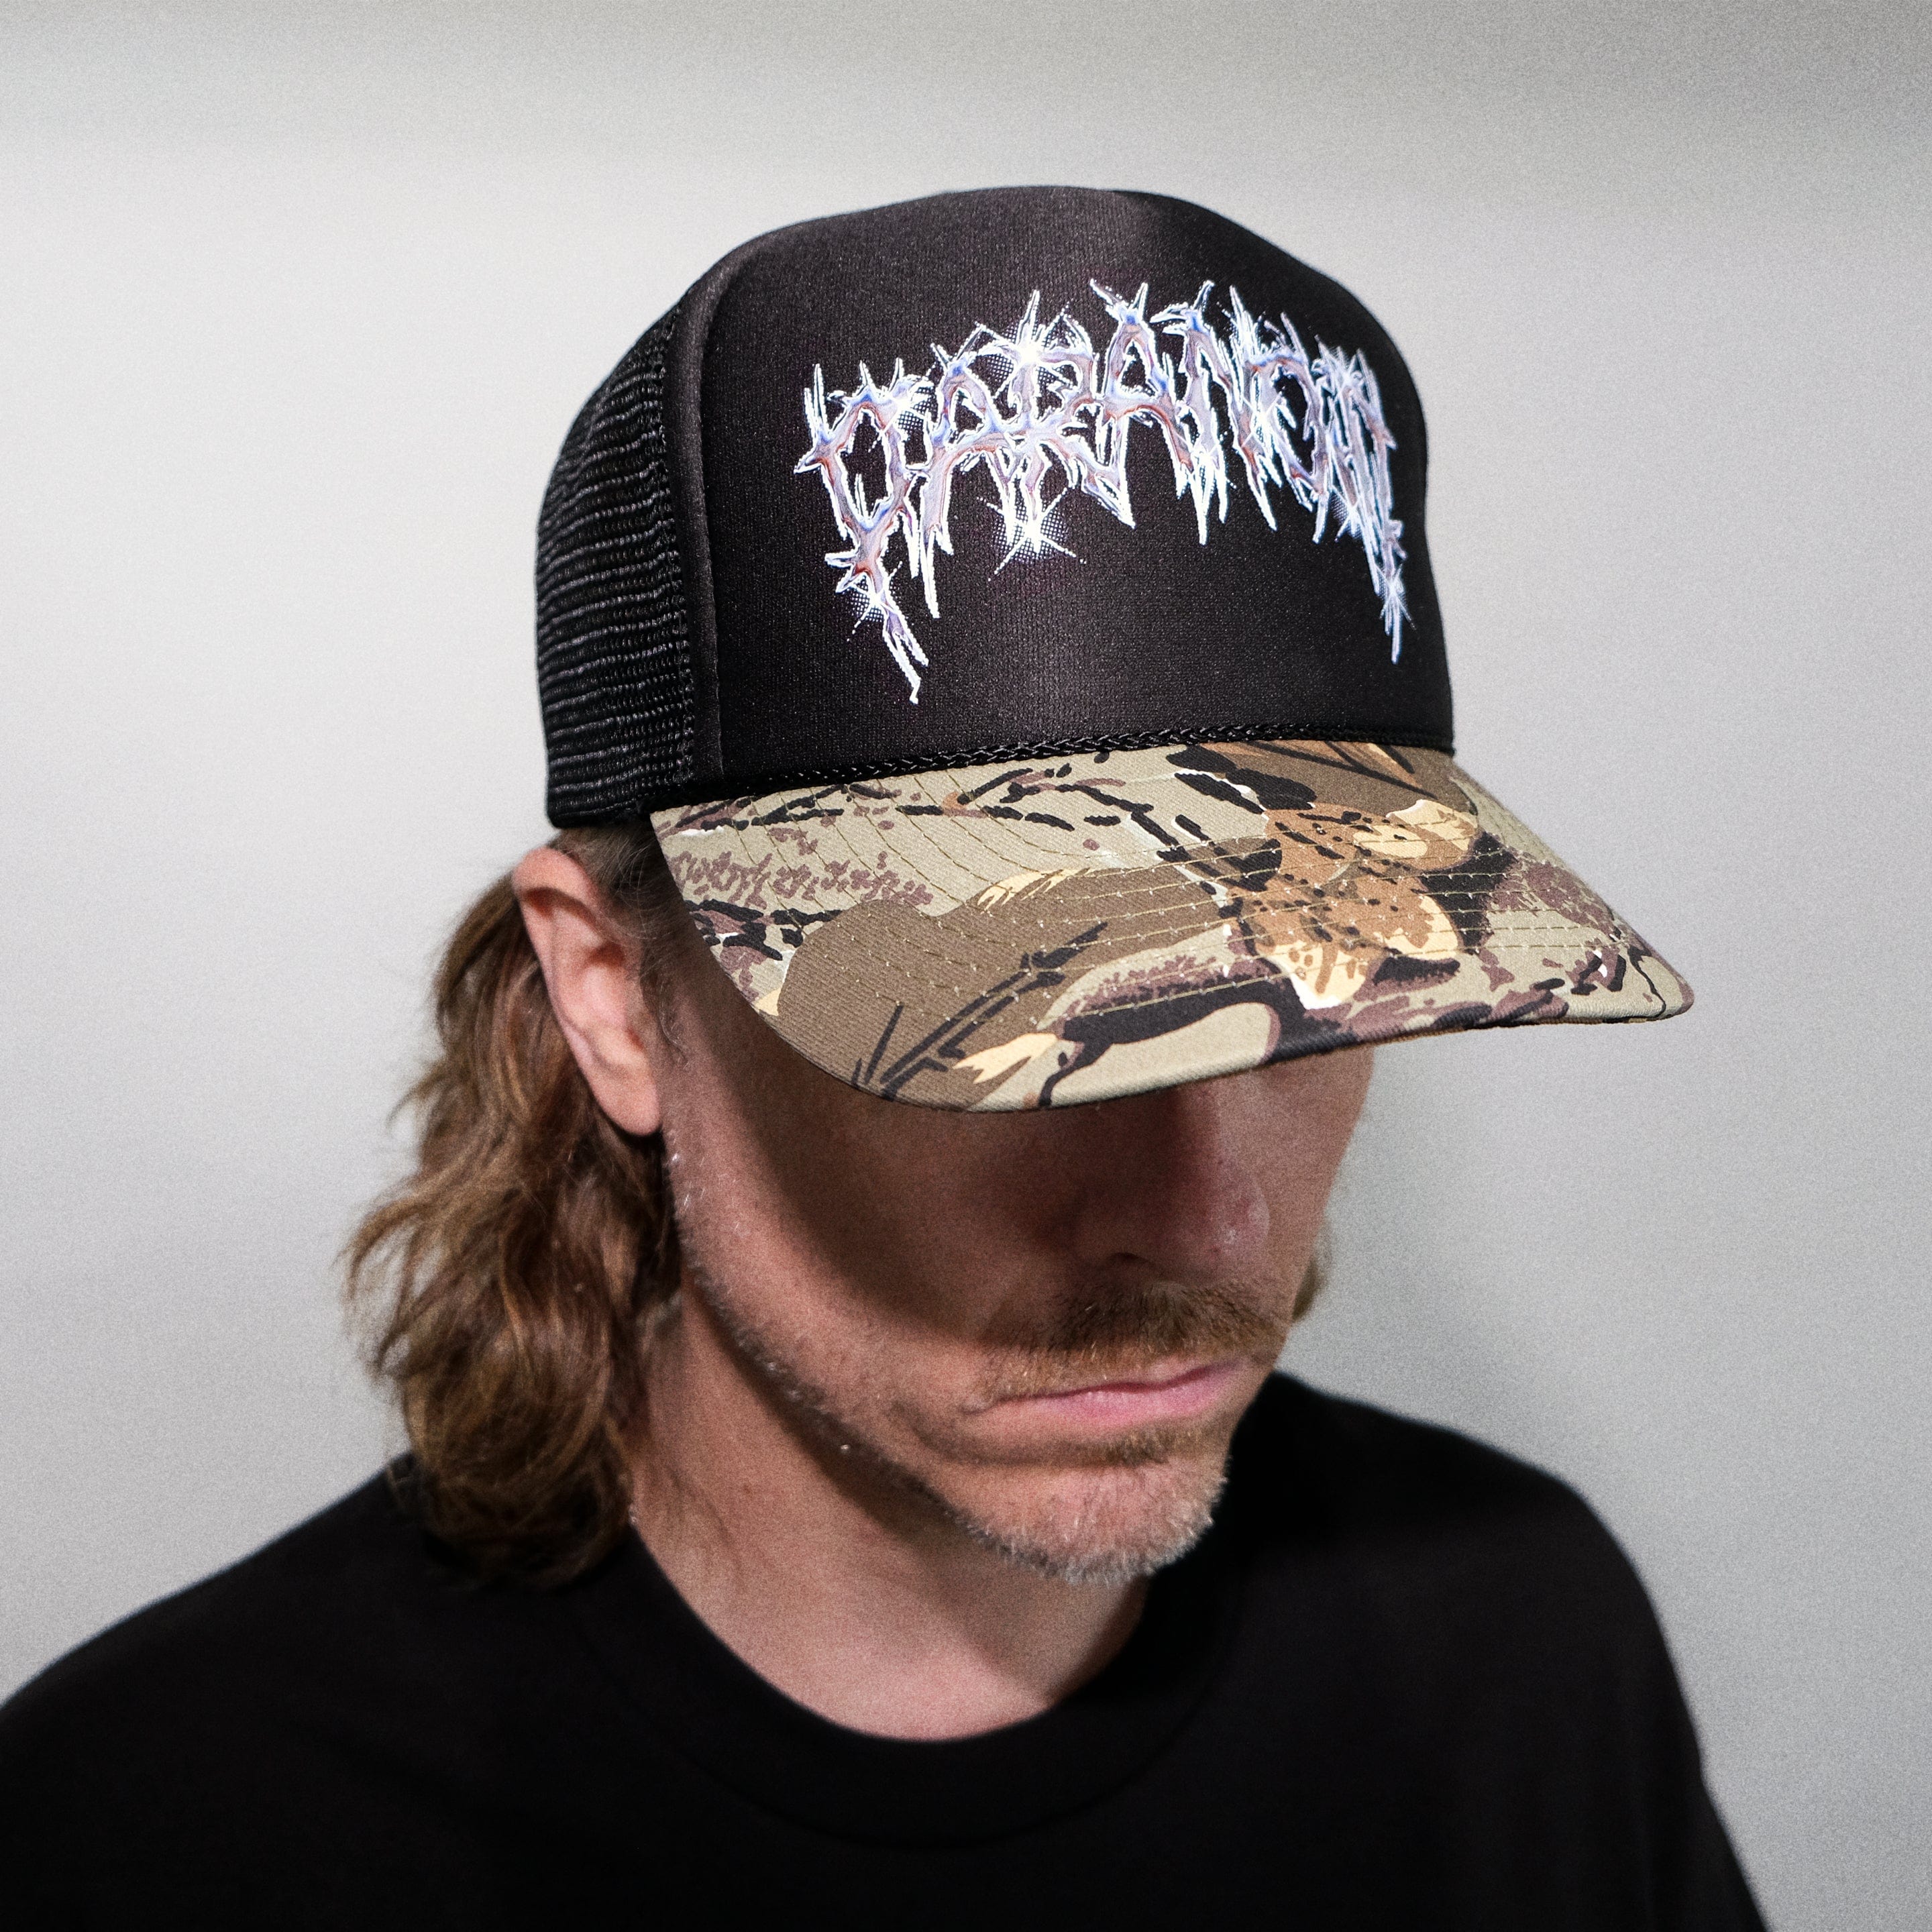 'CAMO AND CHROME' TRUCKER HAT